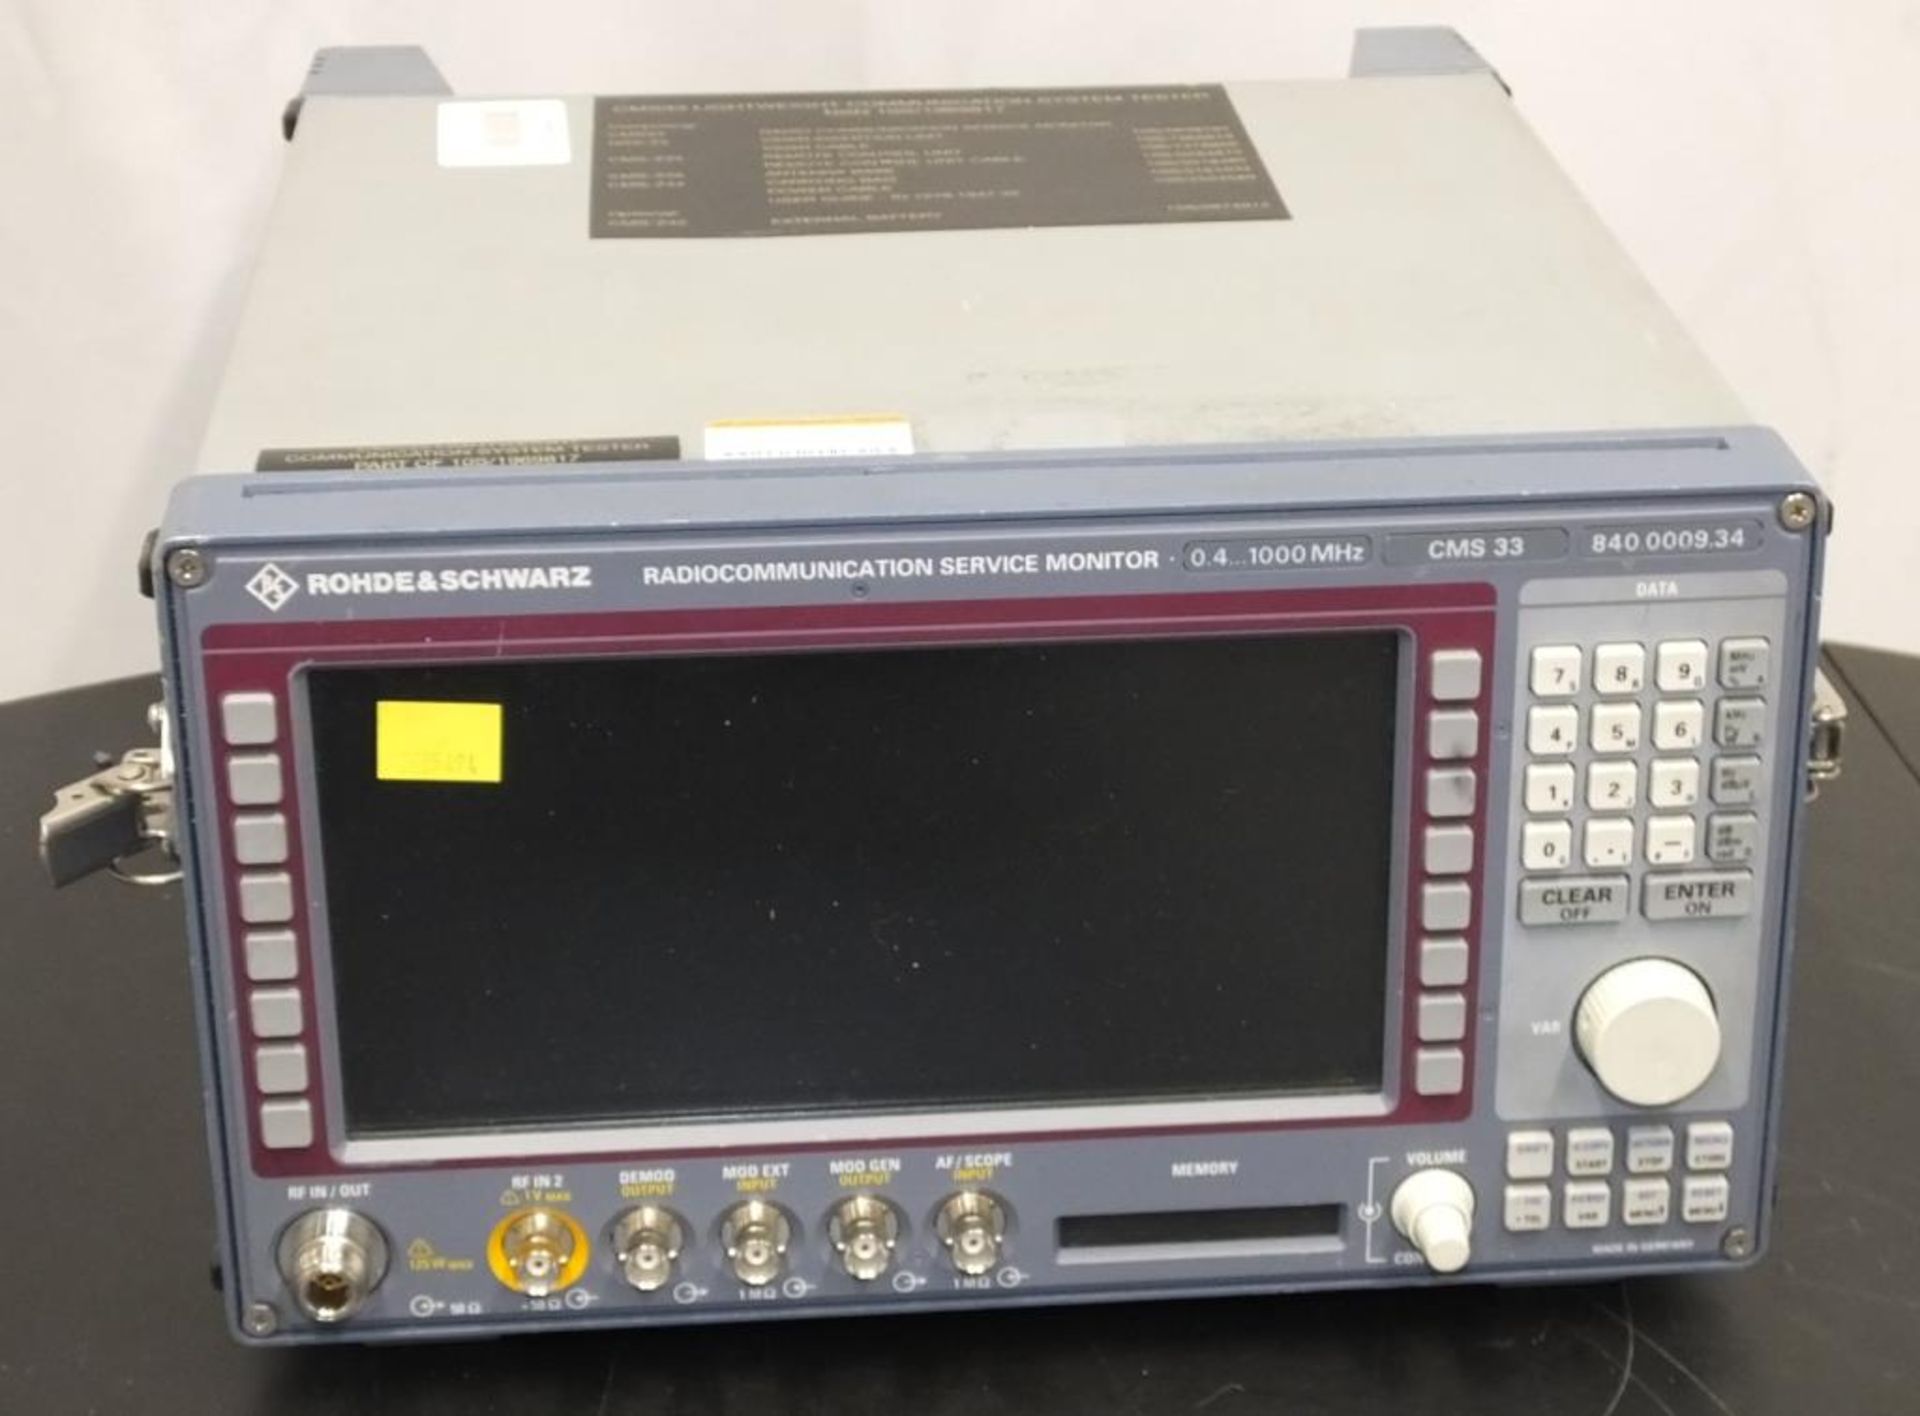 Rohde & Schwarz Radio Communications monitor 0.4 - 1000mhz - CMS33 - 840.0009.34, antenna base in co - Image 2 of 18